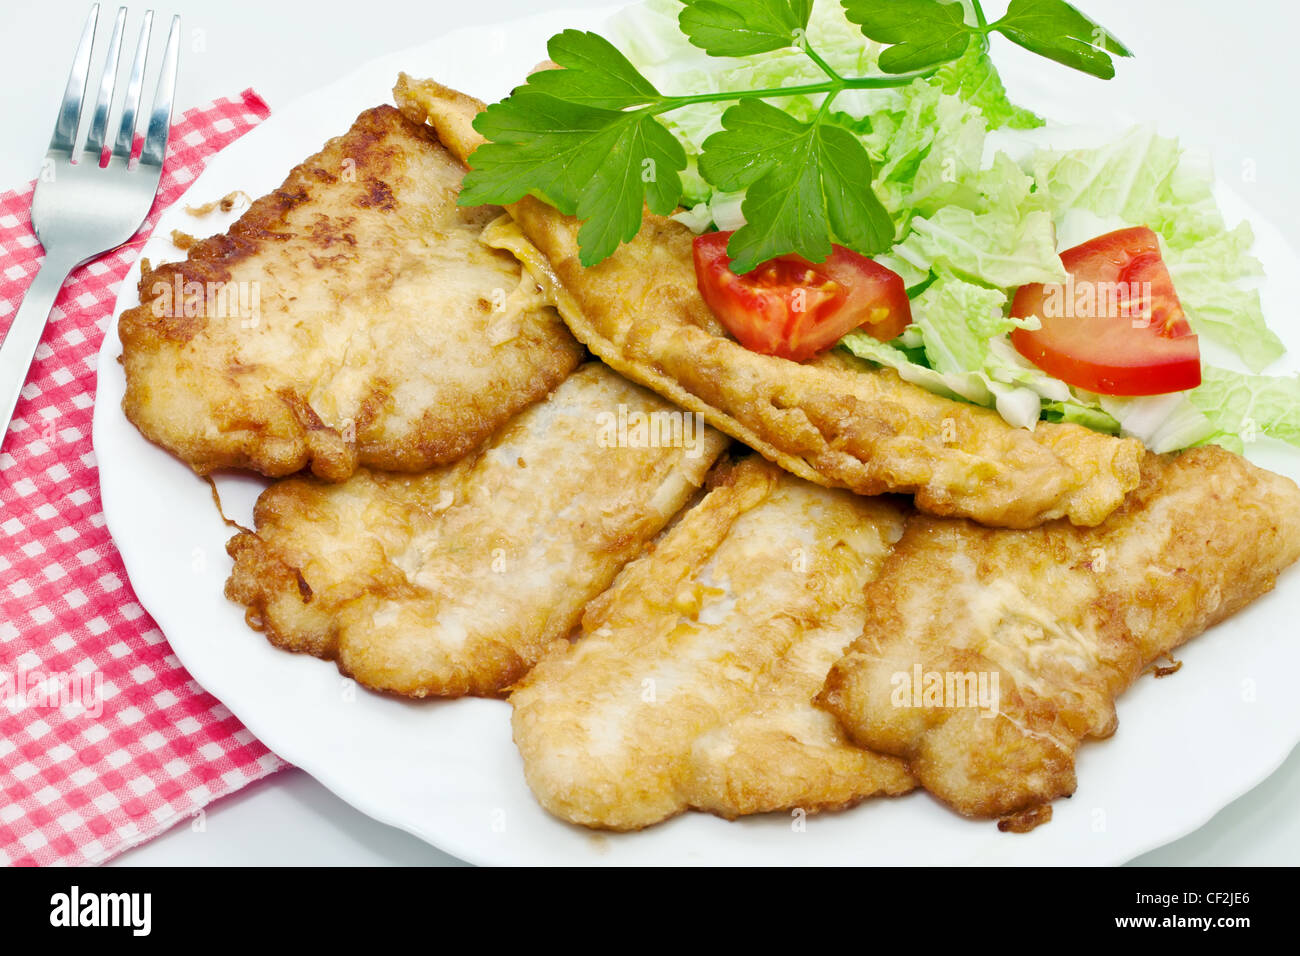 Fried fish fillets with egg and salad. Stock Photo